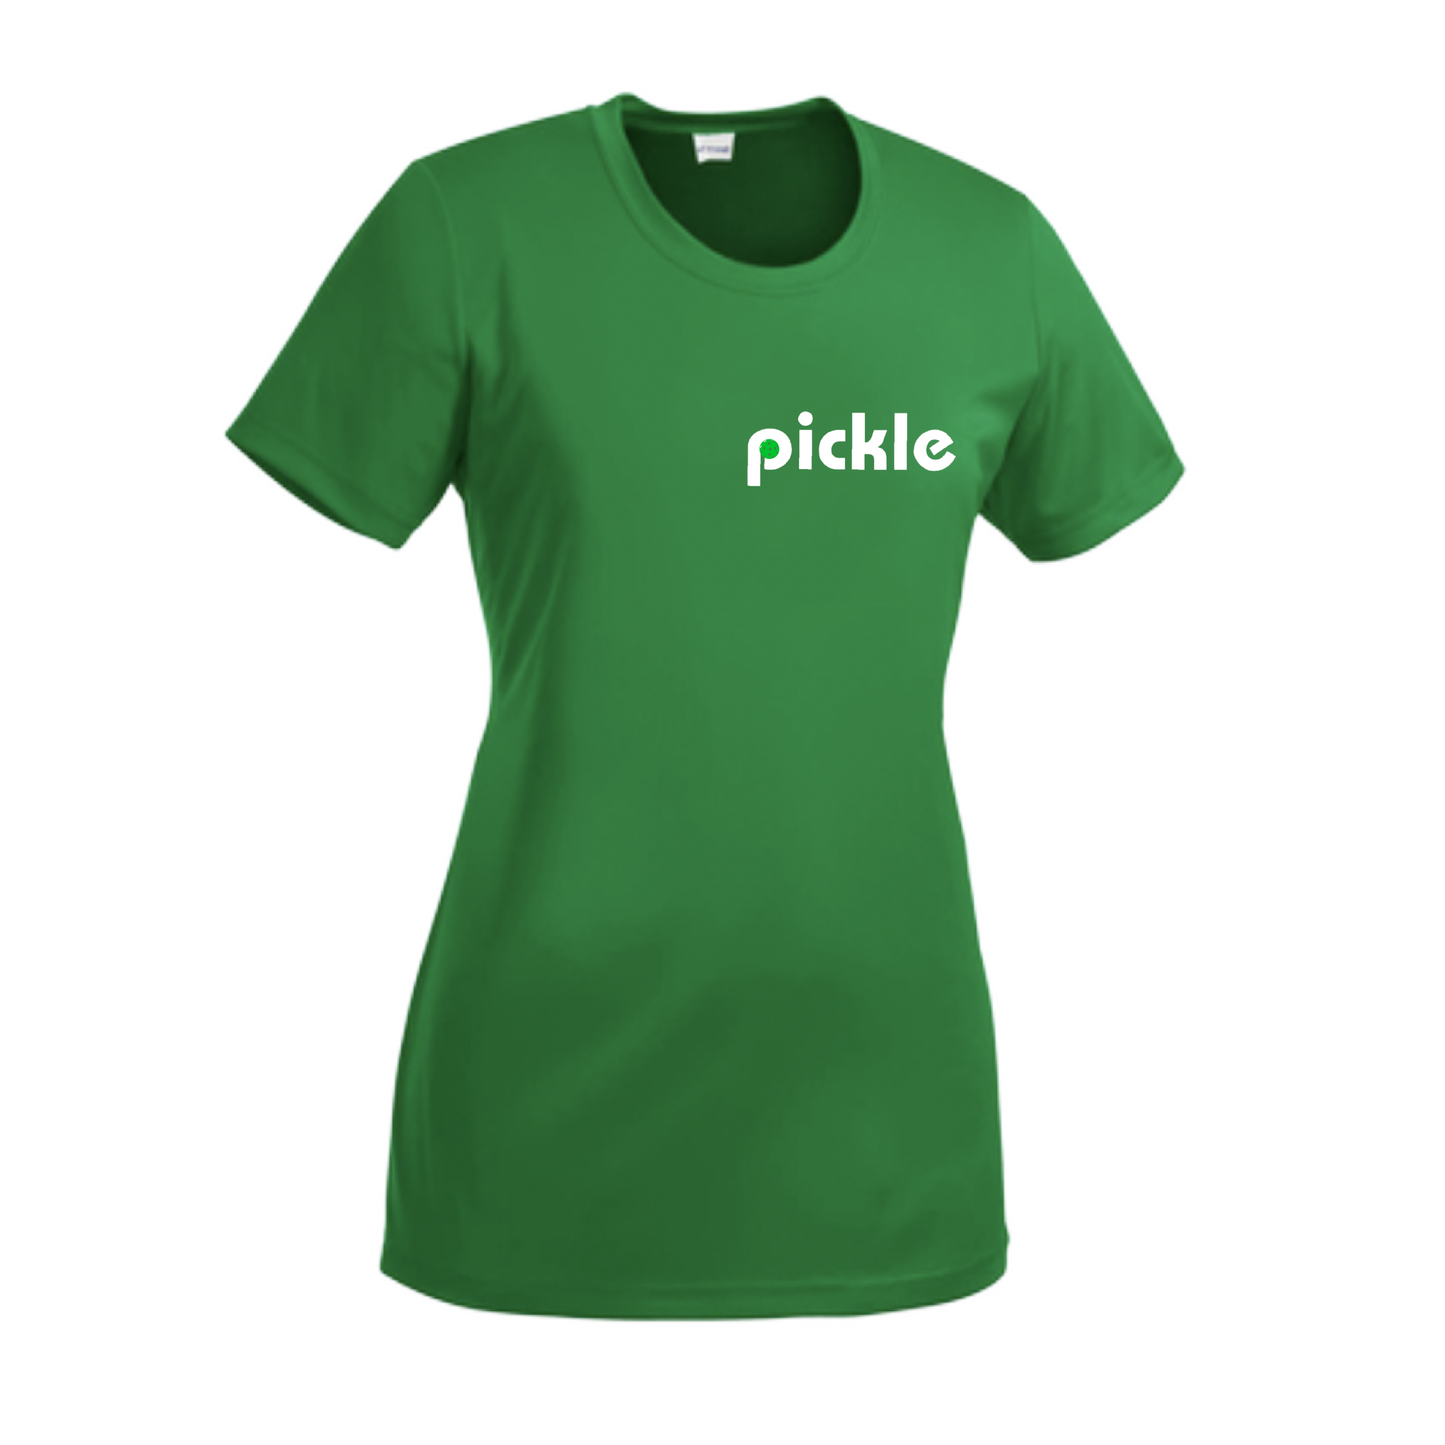 This short-sleeved crew-neck shirt is designed specifically for pickleball enthusiasts. Lightweight, roomy, and breathable, it is also equipped with PosiCharge technology to lock in color and maintain vibrant logos. Additionally, removable tags and set-in sleeves add comfort and ease of movement. With PosiCharge, designs stay sharp and clear, providing the perfect look for active lifestyles. Its moisture-wicking fabric helps keep you comfortable and cool, allowing you to stay focused on the gam